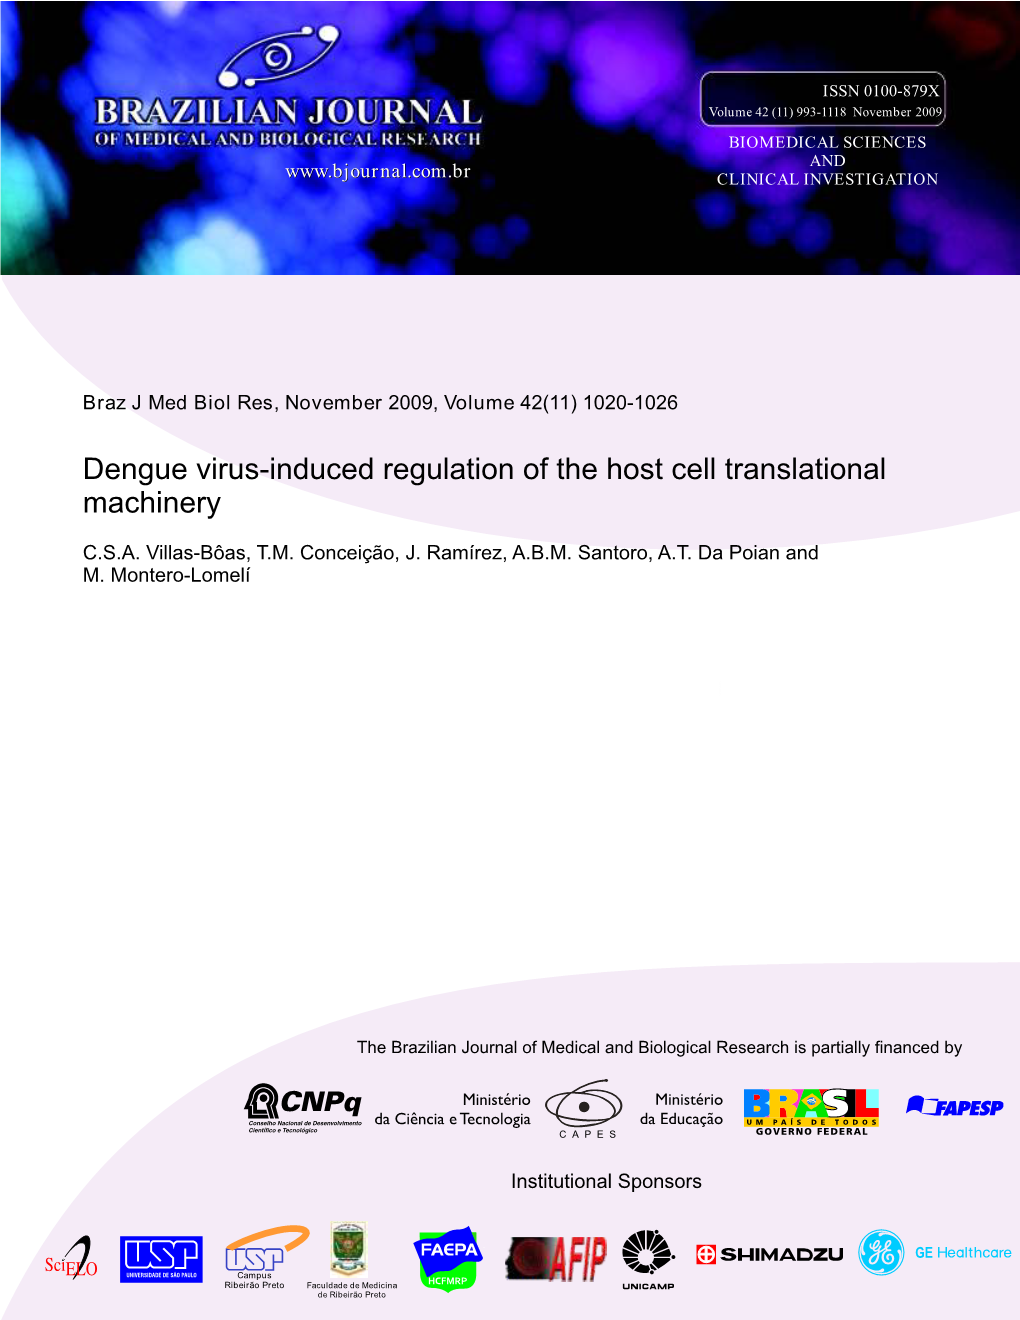 Dengue Virus-Induced Regulation of the Host Cell Translational Machinery